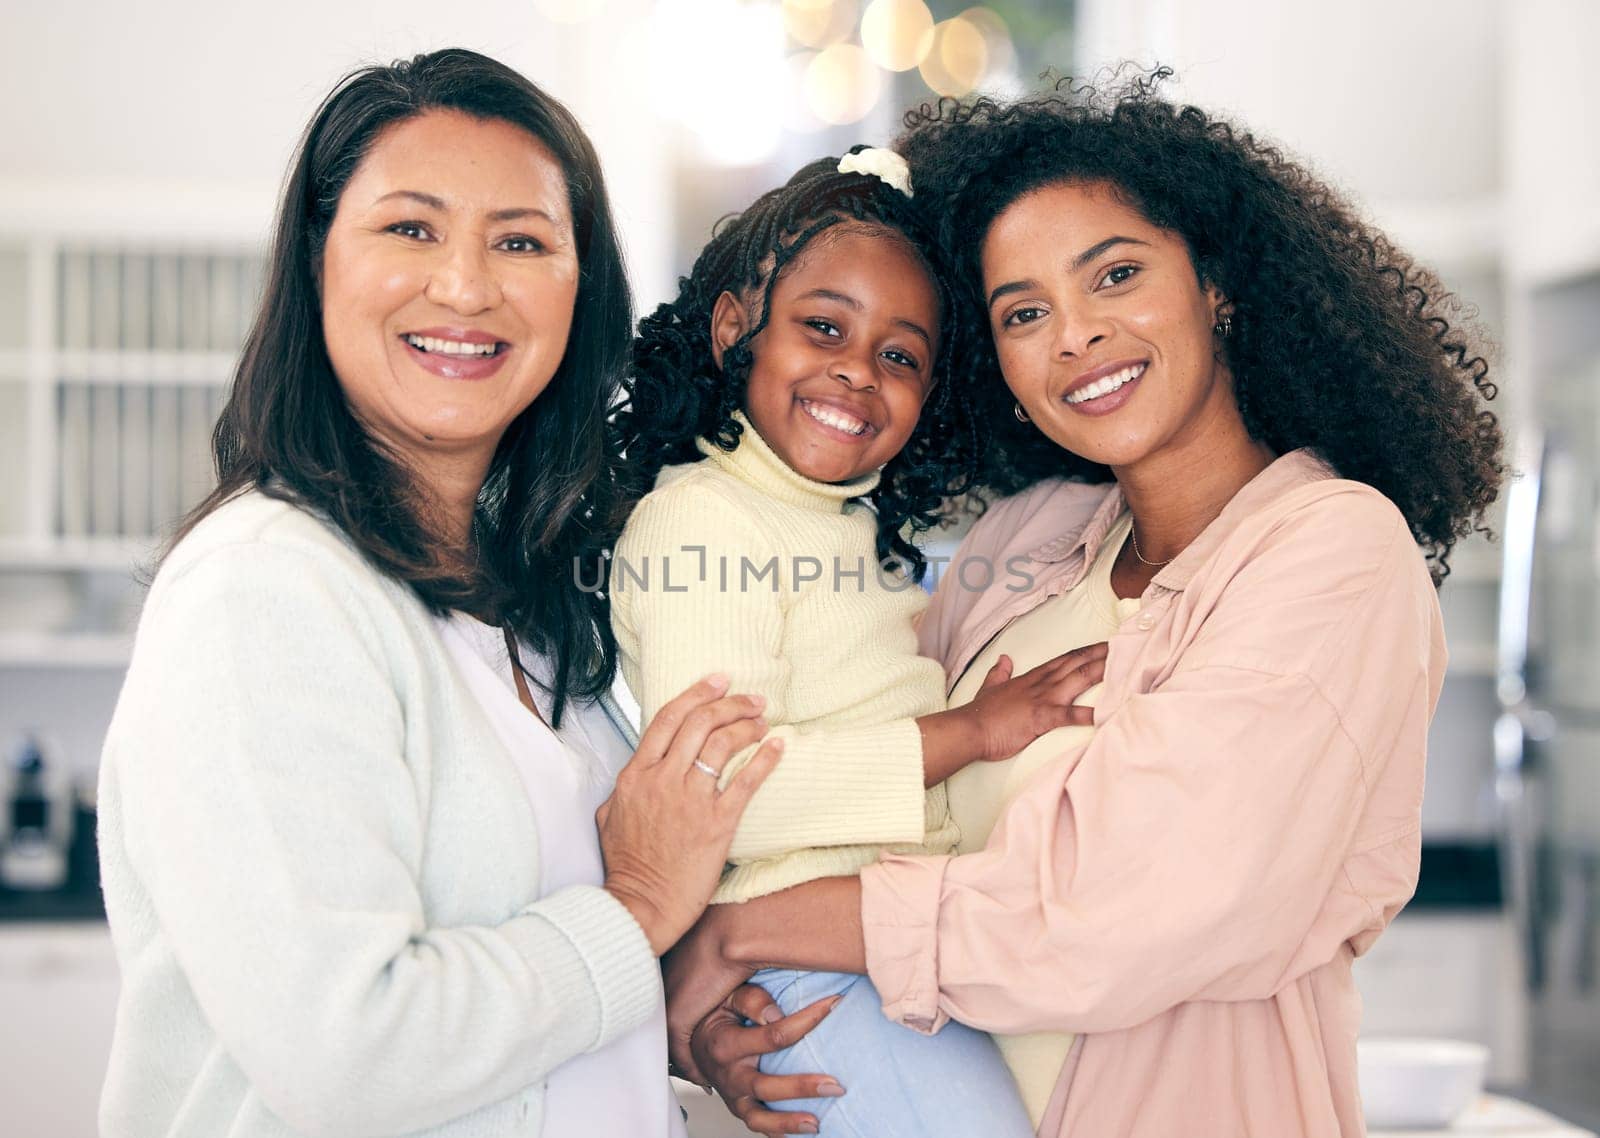 Portrait of lgbt family, women with child and love in multiracial relationship with happy adoption. Diversity, pride and mothers with girl, lesbian couple with smile, support and loving home together.